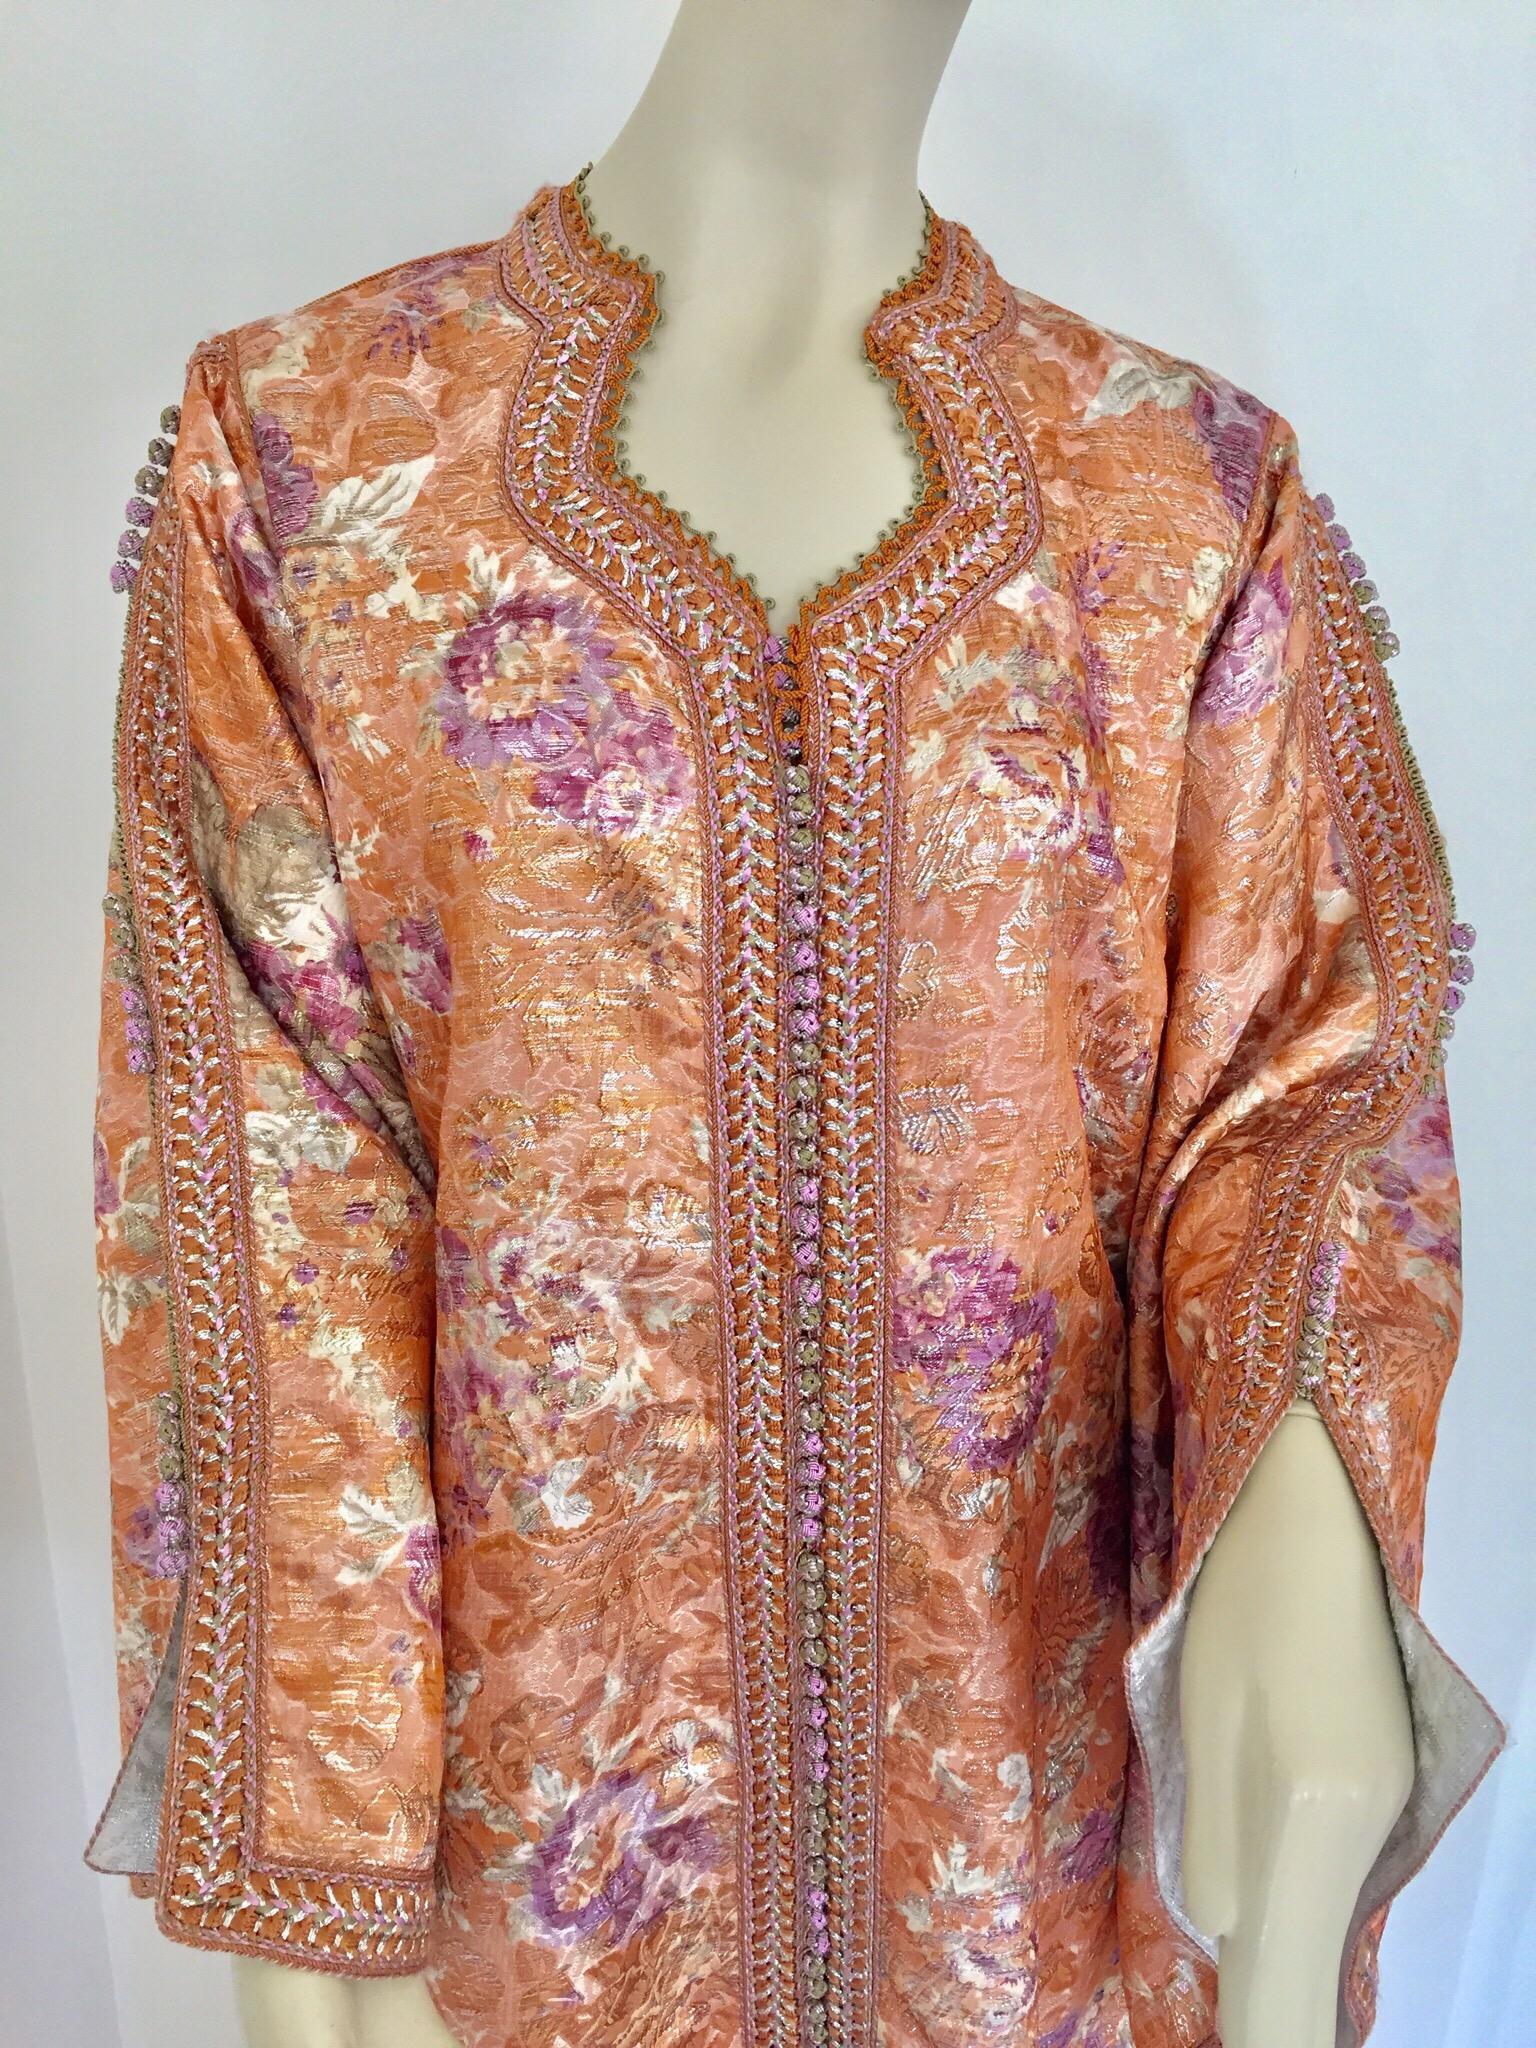 Moroccan Kaftan Orange and Purple Floral with Gold Embroidered Maxi Dress Caftan For Sale 6